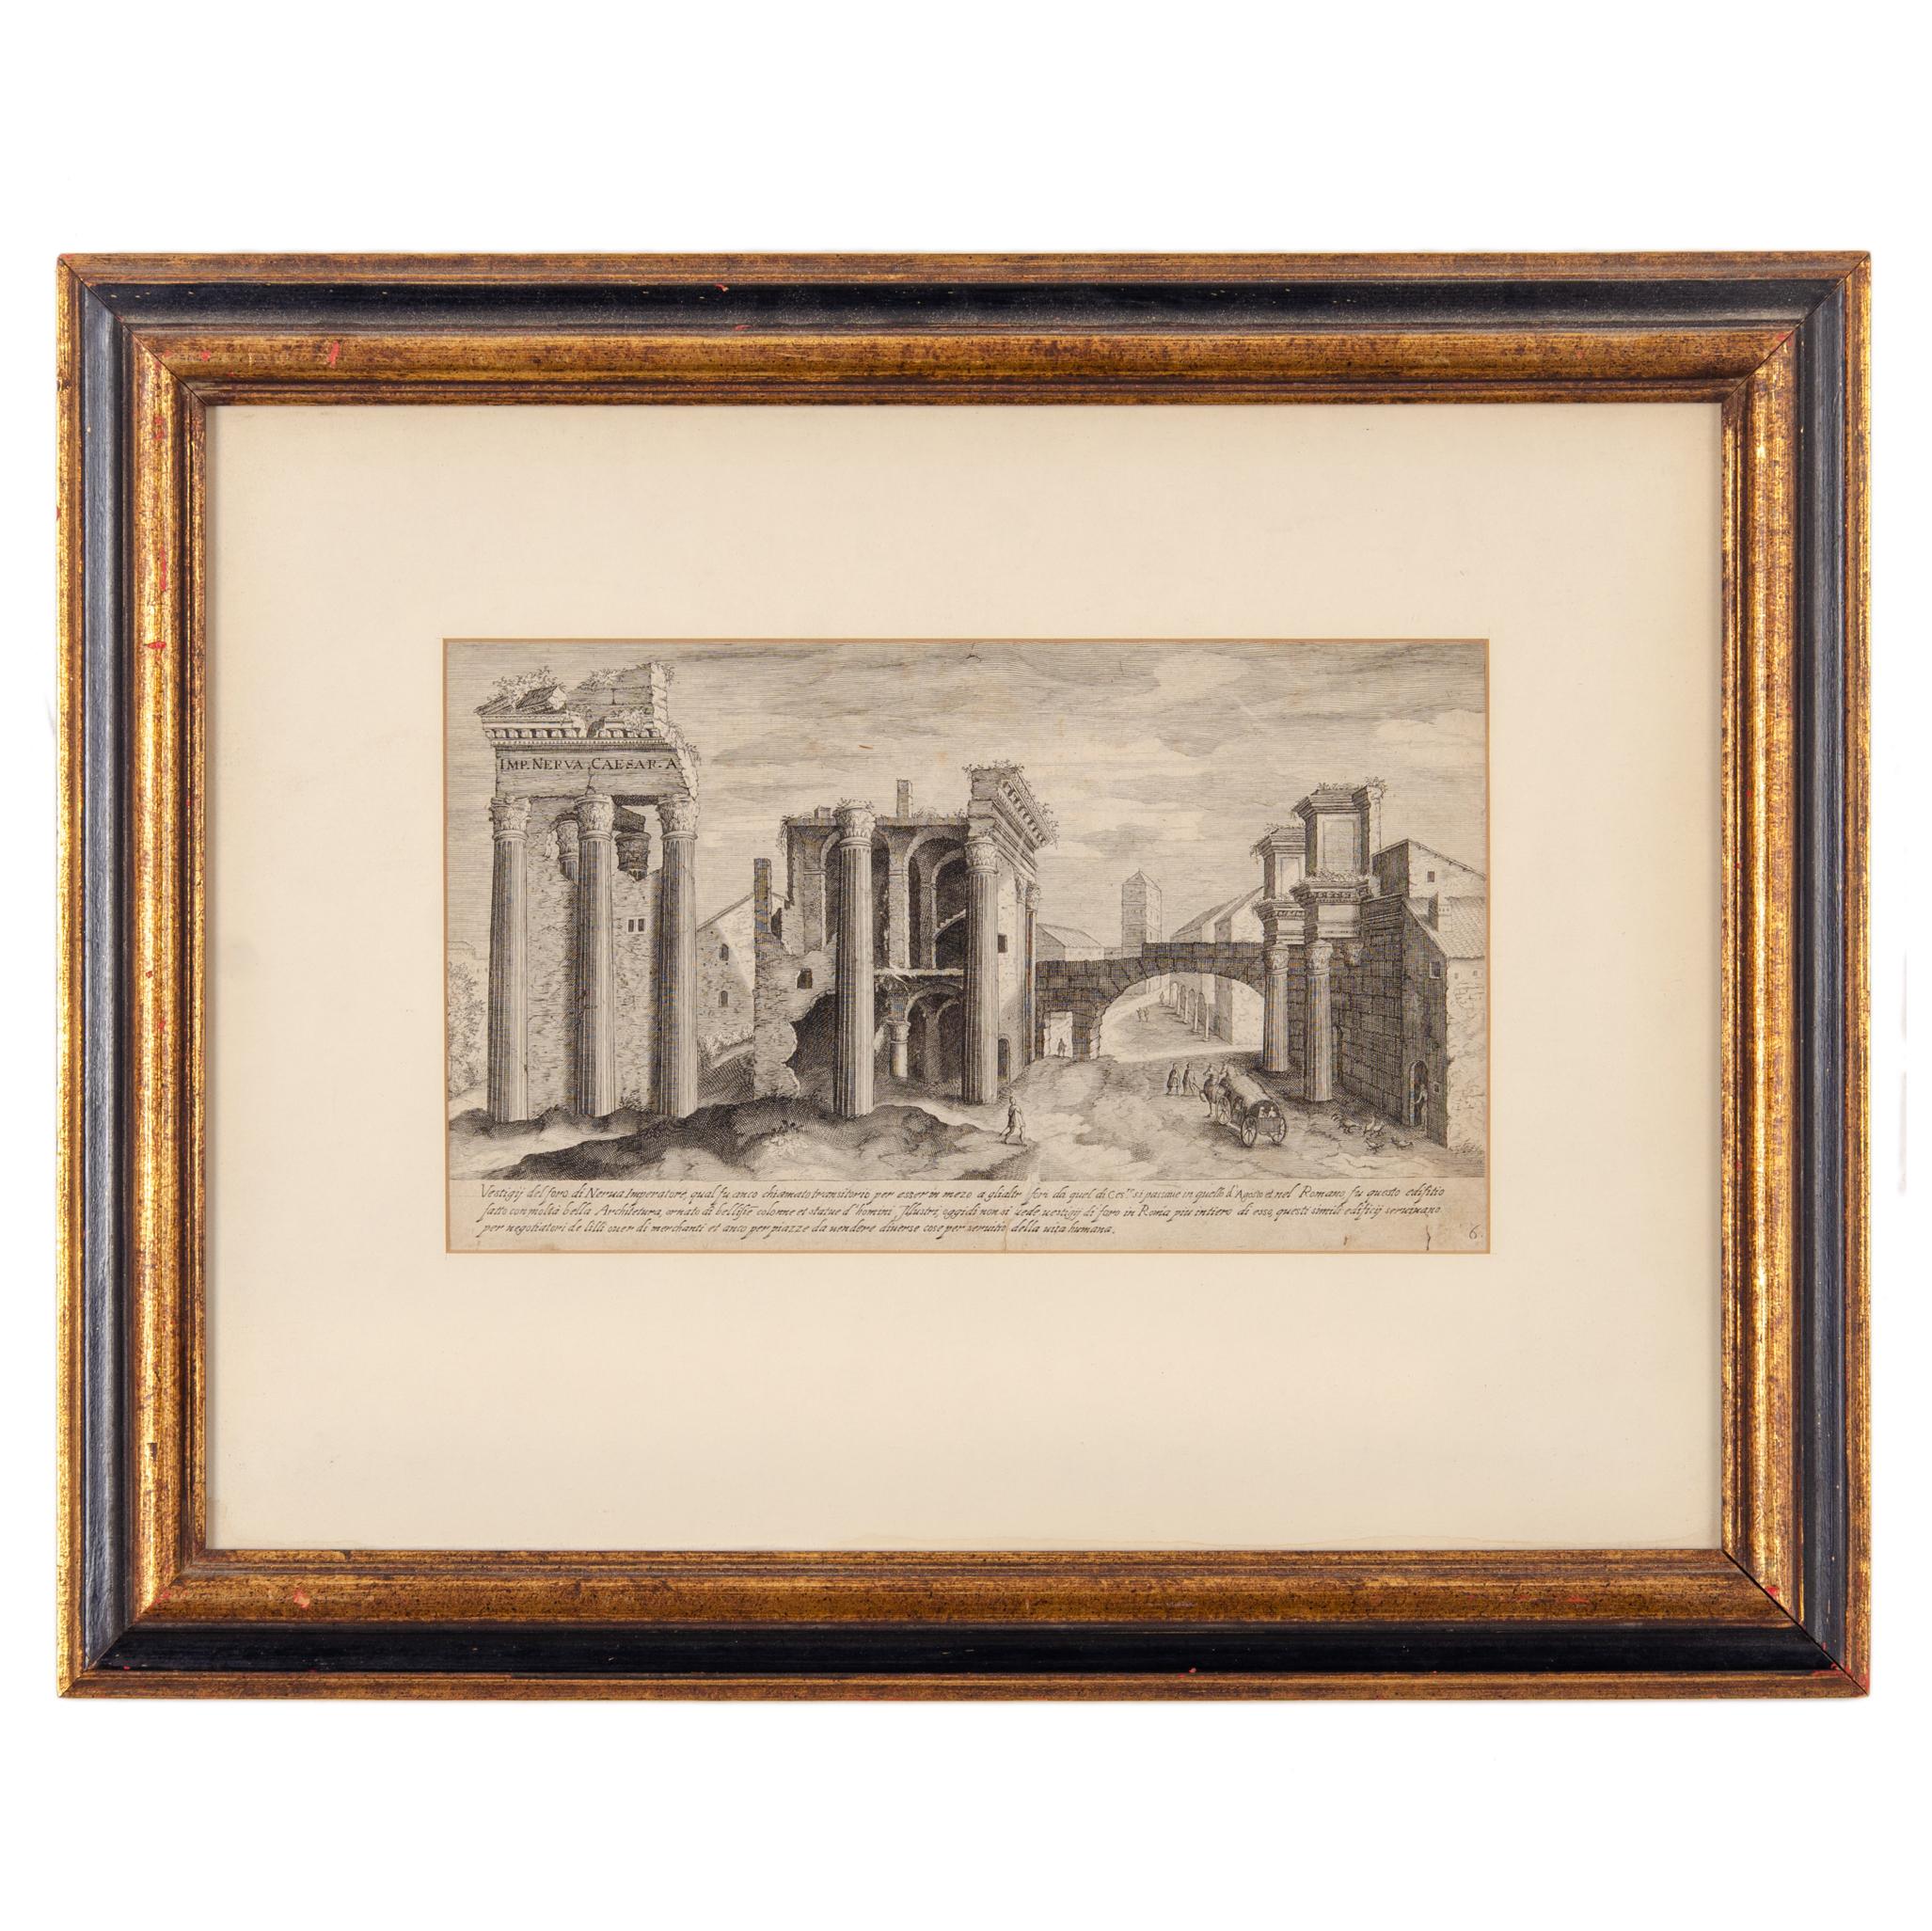 Italian Étienne Dupérac Etchings of Ancient Roman Ruins, 17th Century - A Pair For Sale